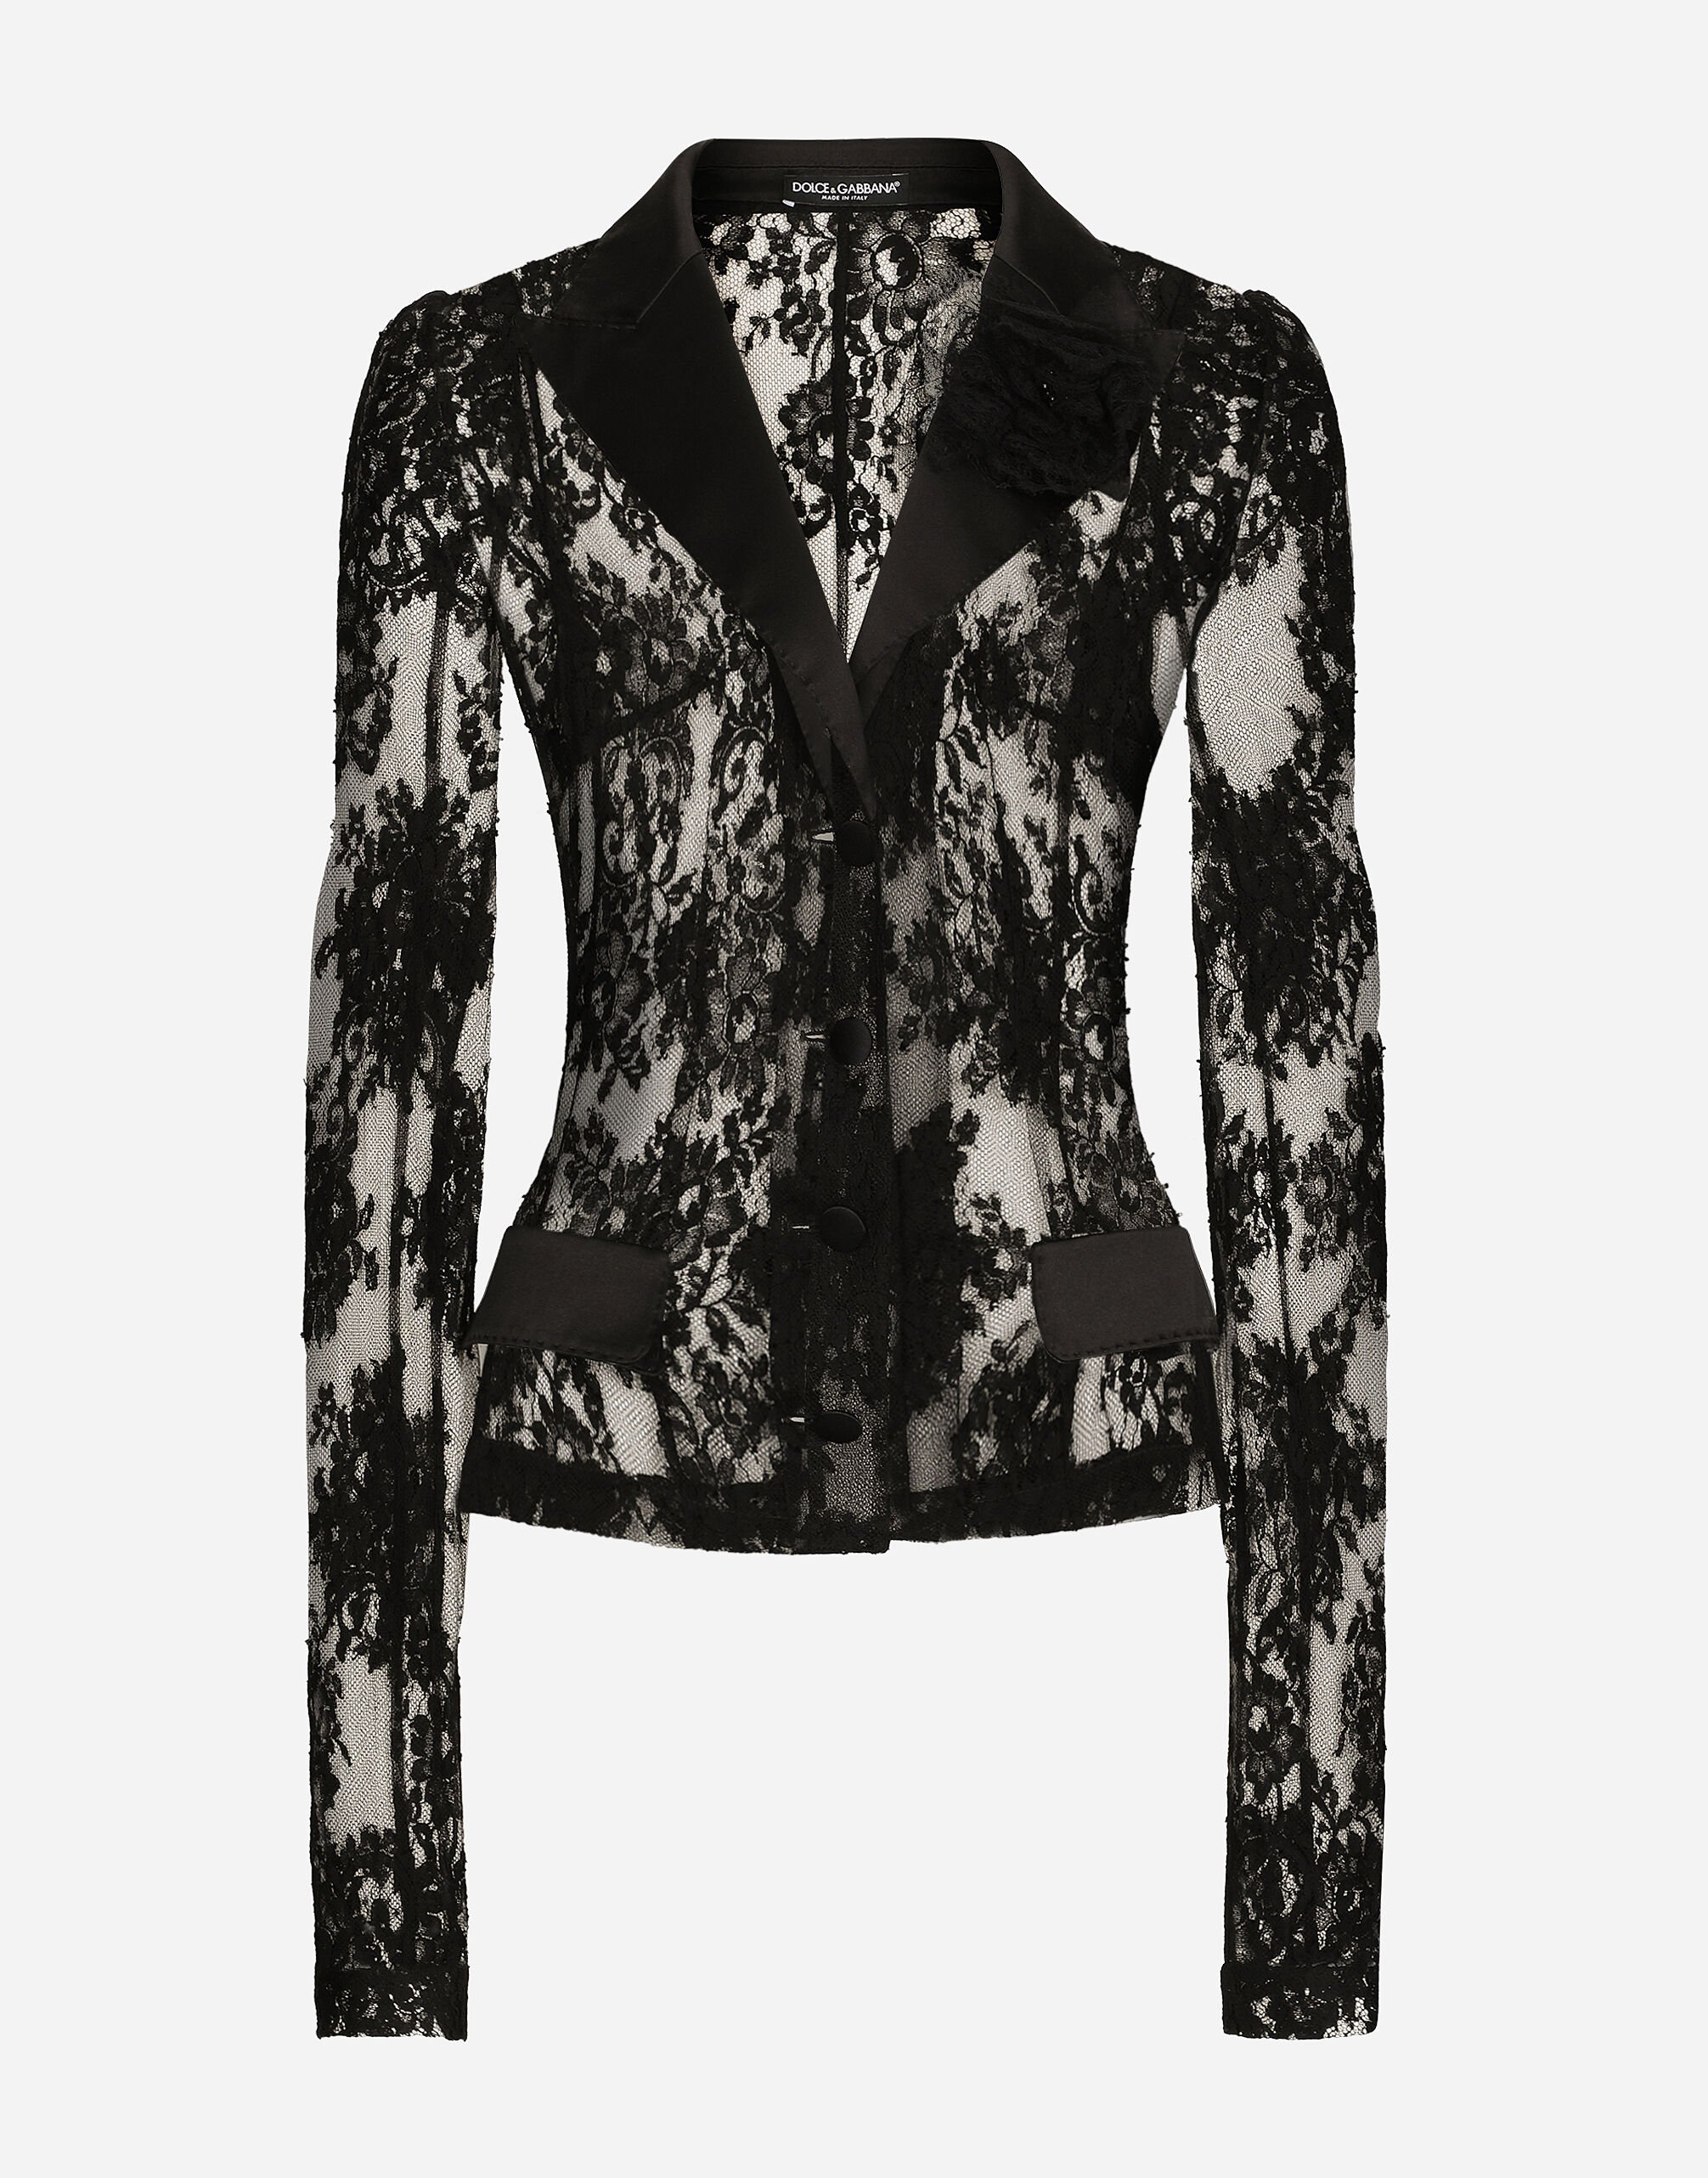 Dolce & Gabbana Floral lace jacket with satin details Black BB7287A1471